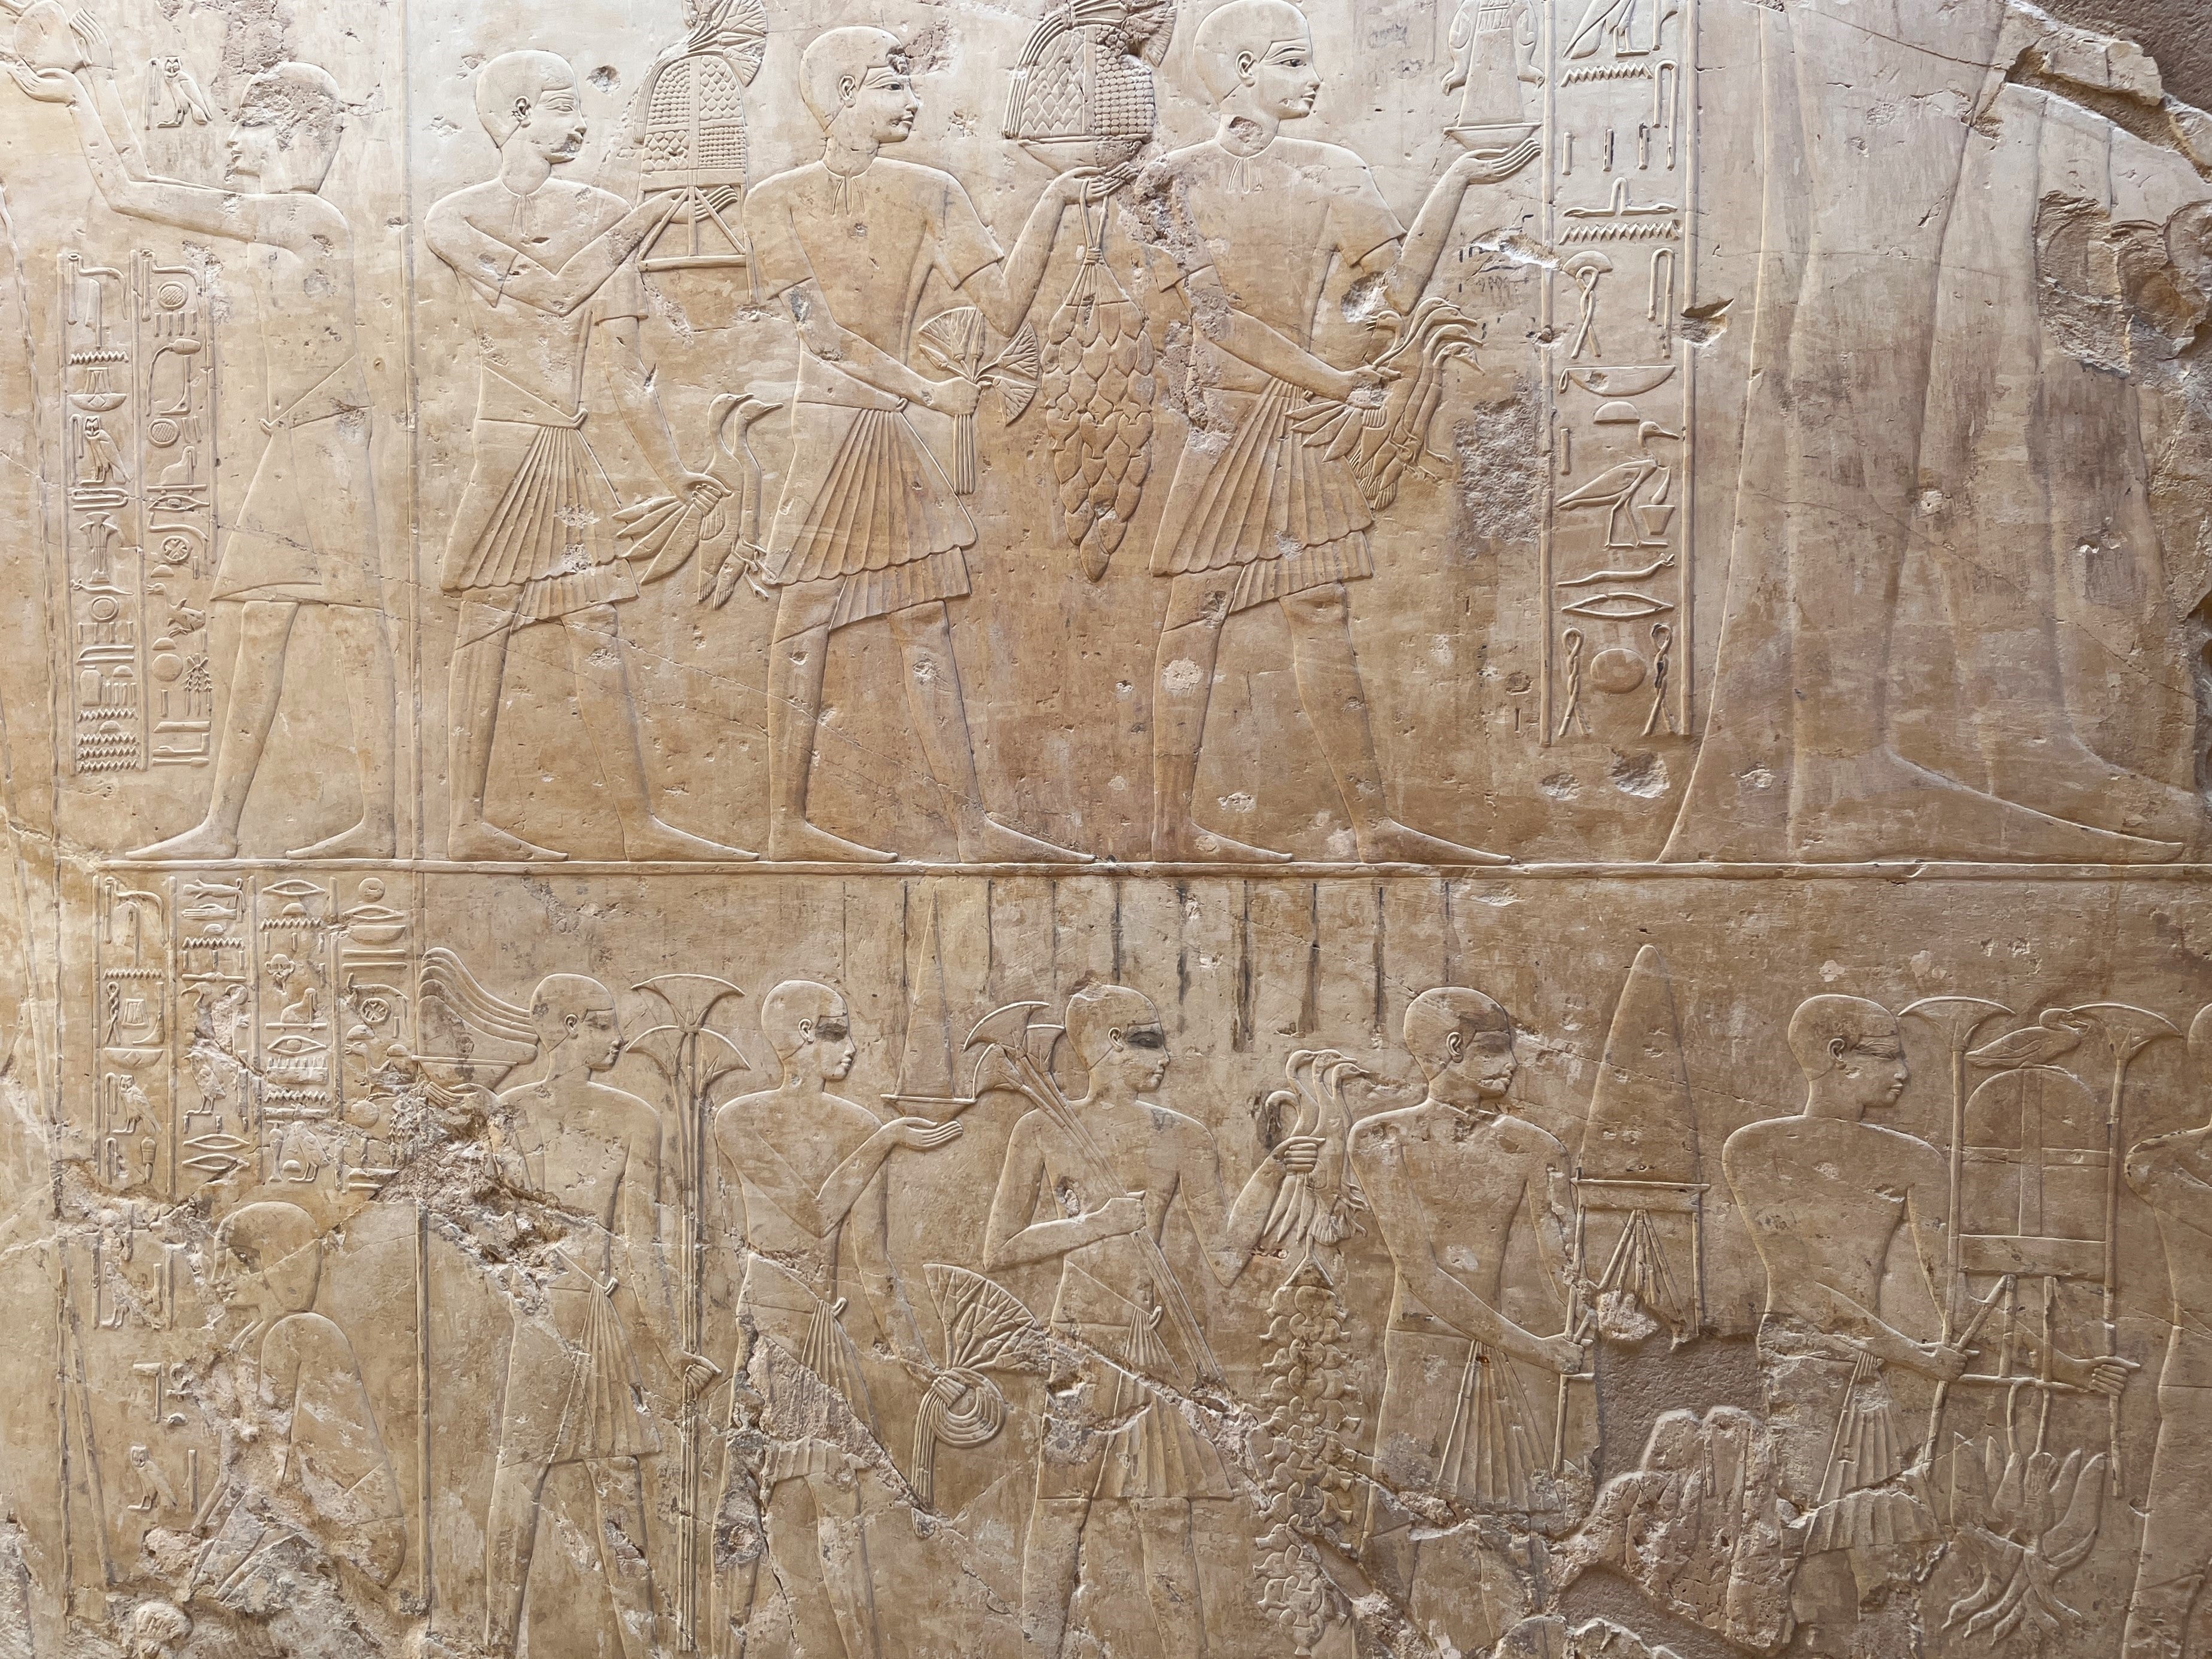 Tomb wall reliefs from the Tomb of Ramose